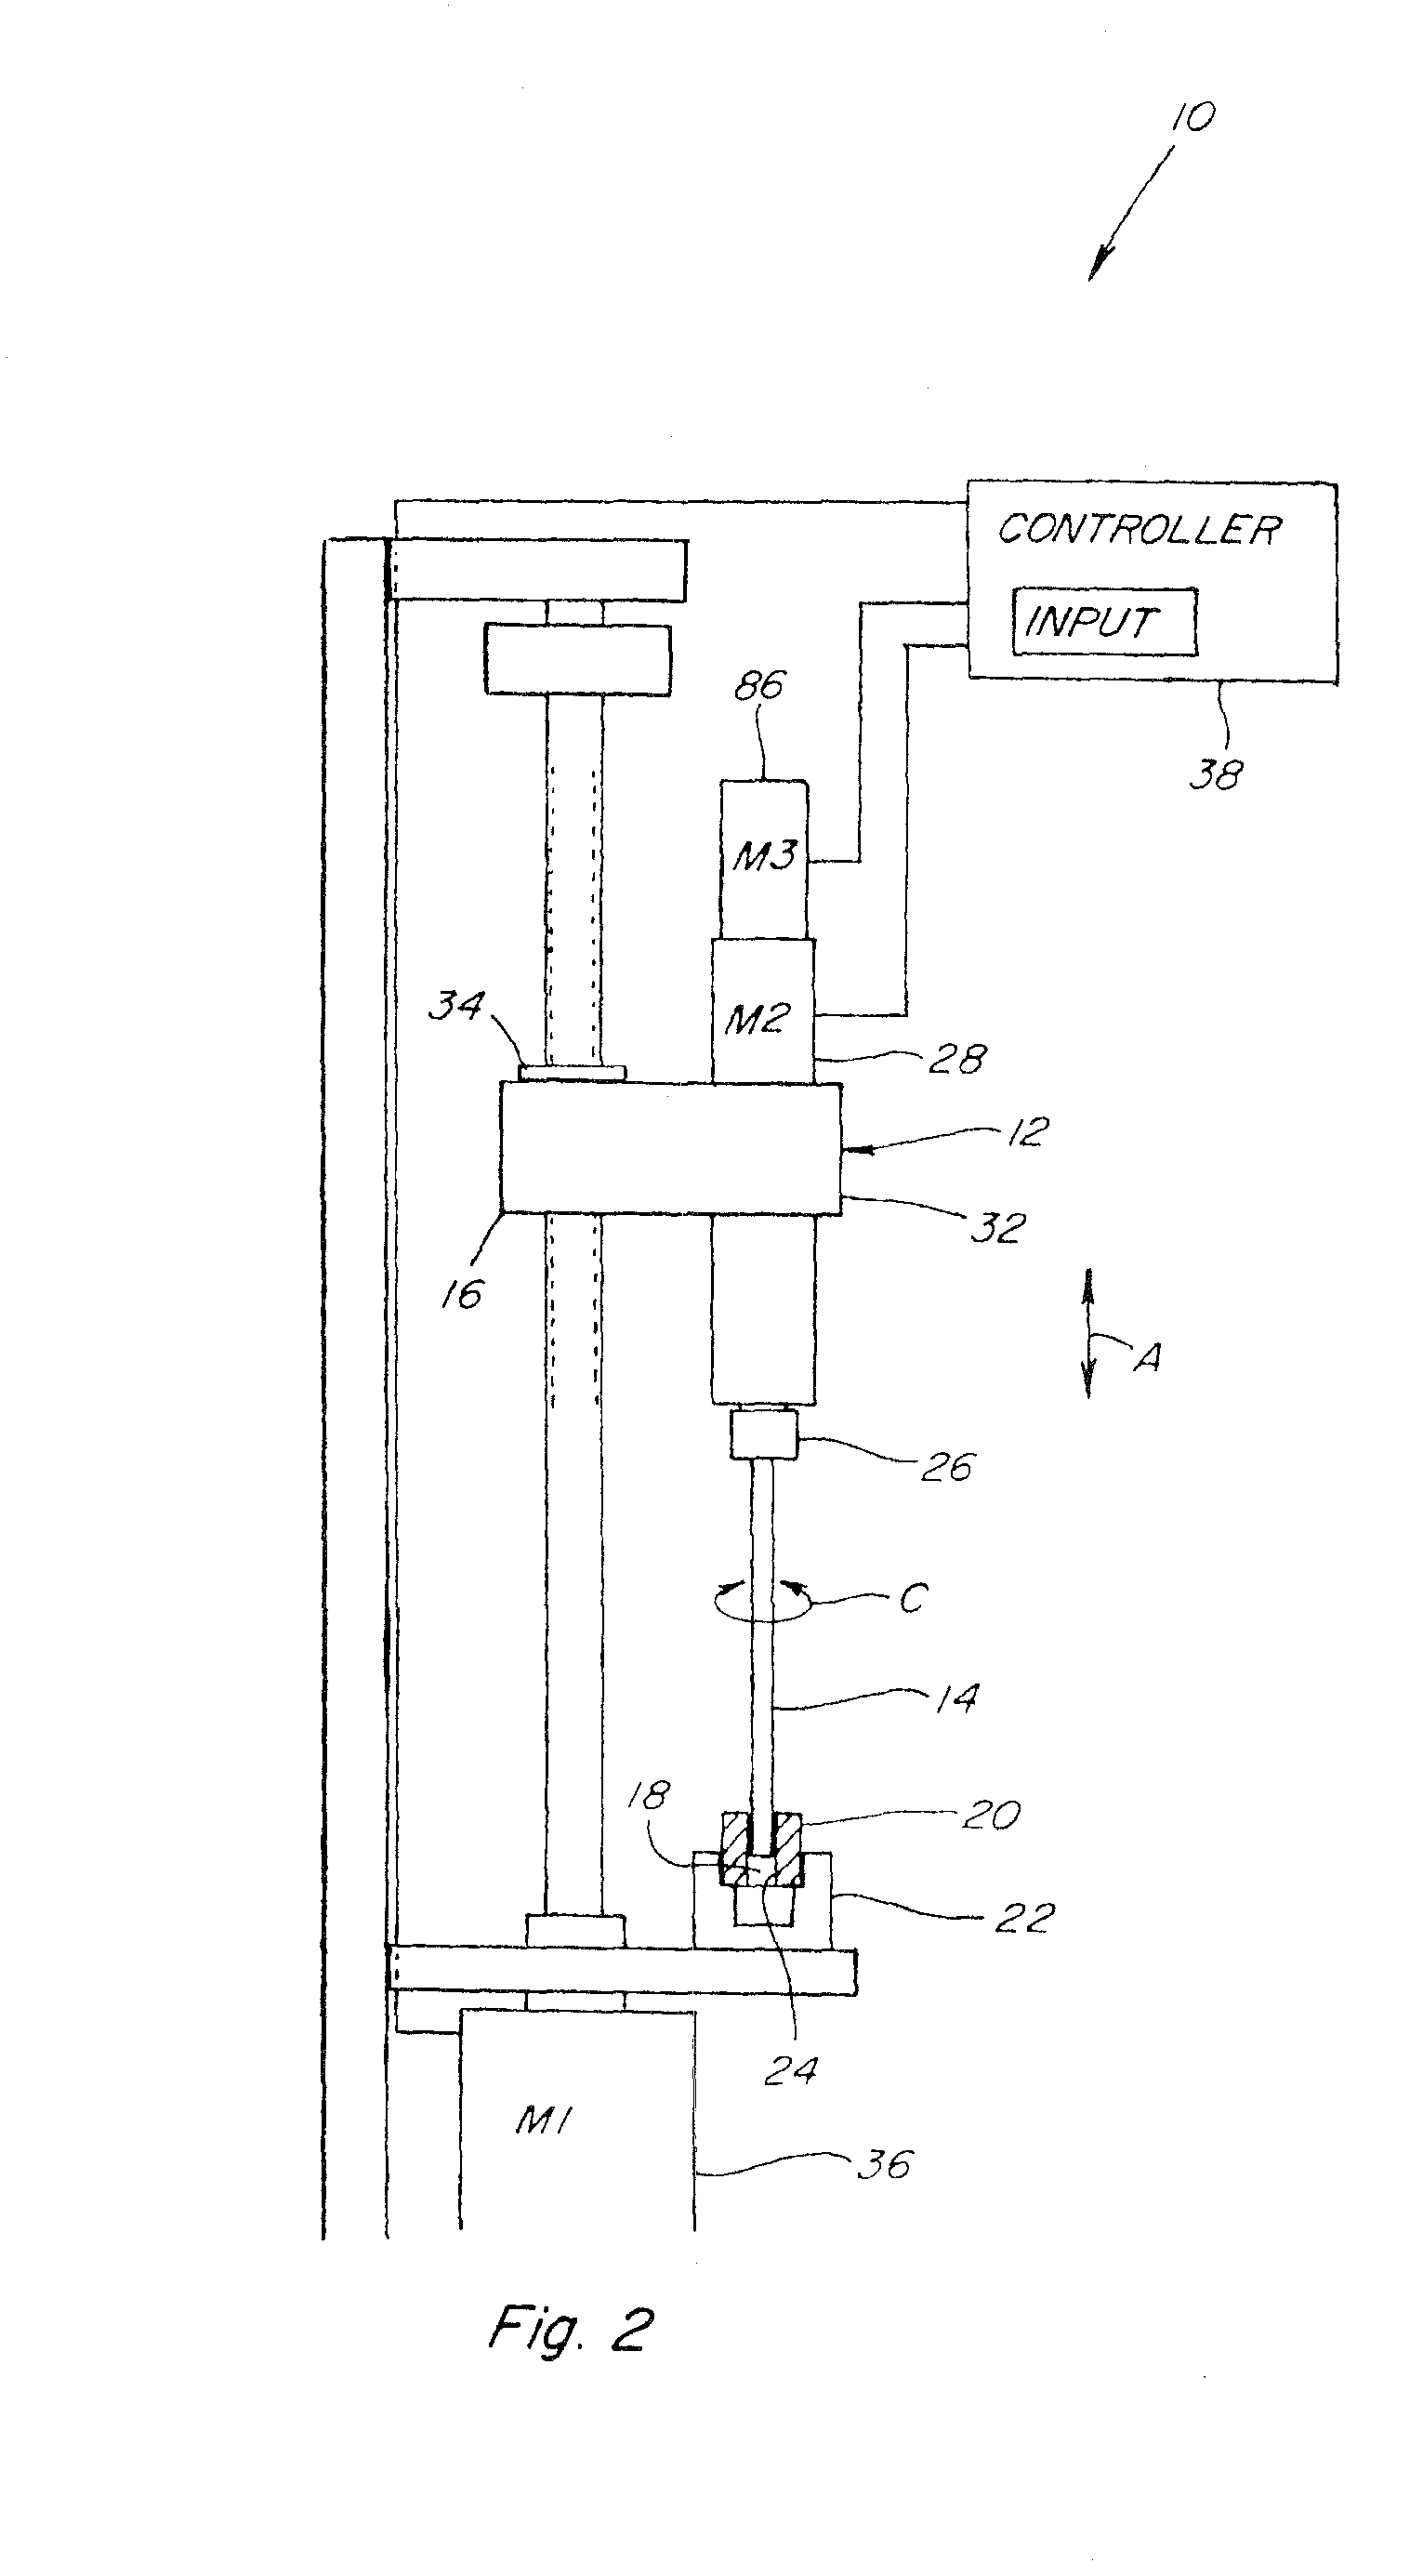 Honing feed system and method employing rapid tool advancement and feed force signal conditioning